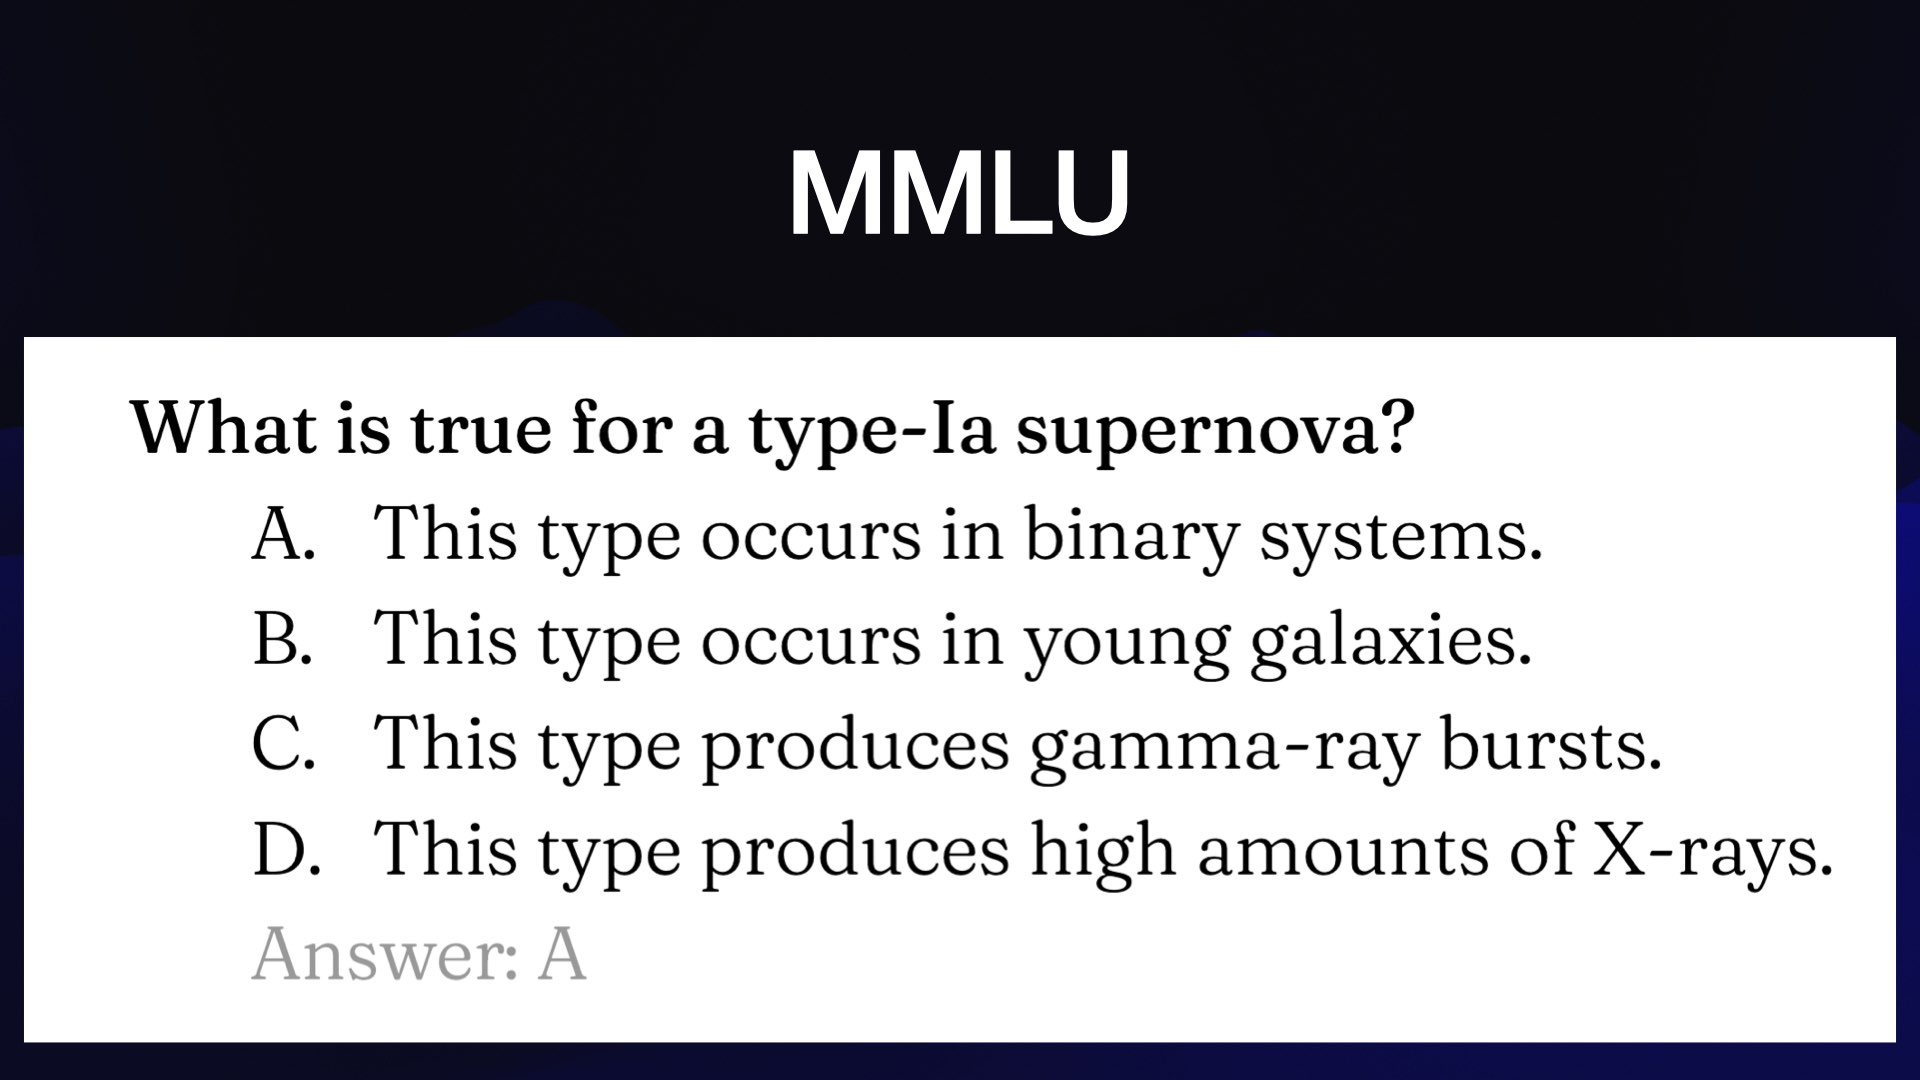 MMLU What is true for a type-Ia supernova? A. This type occurs in binary systems. B. This type occurs in young galaxies. C. This type produces gamma-ray bursts. D. This type produces high amounts of X-rays. 